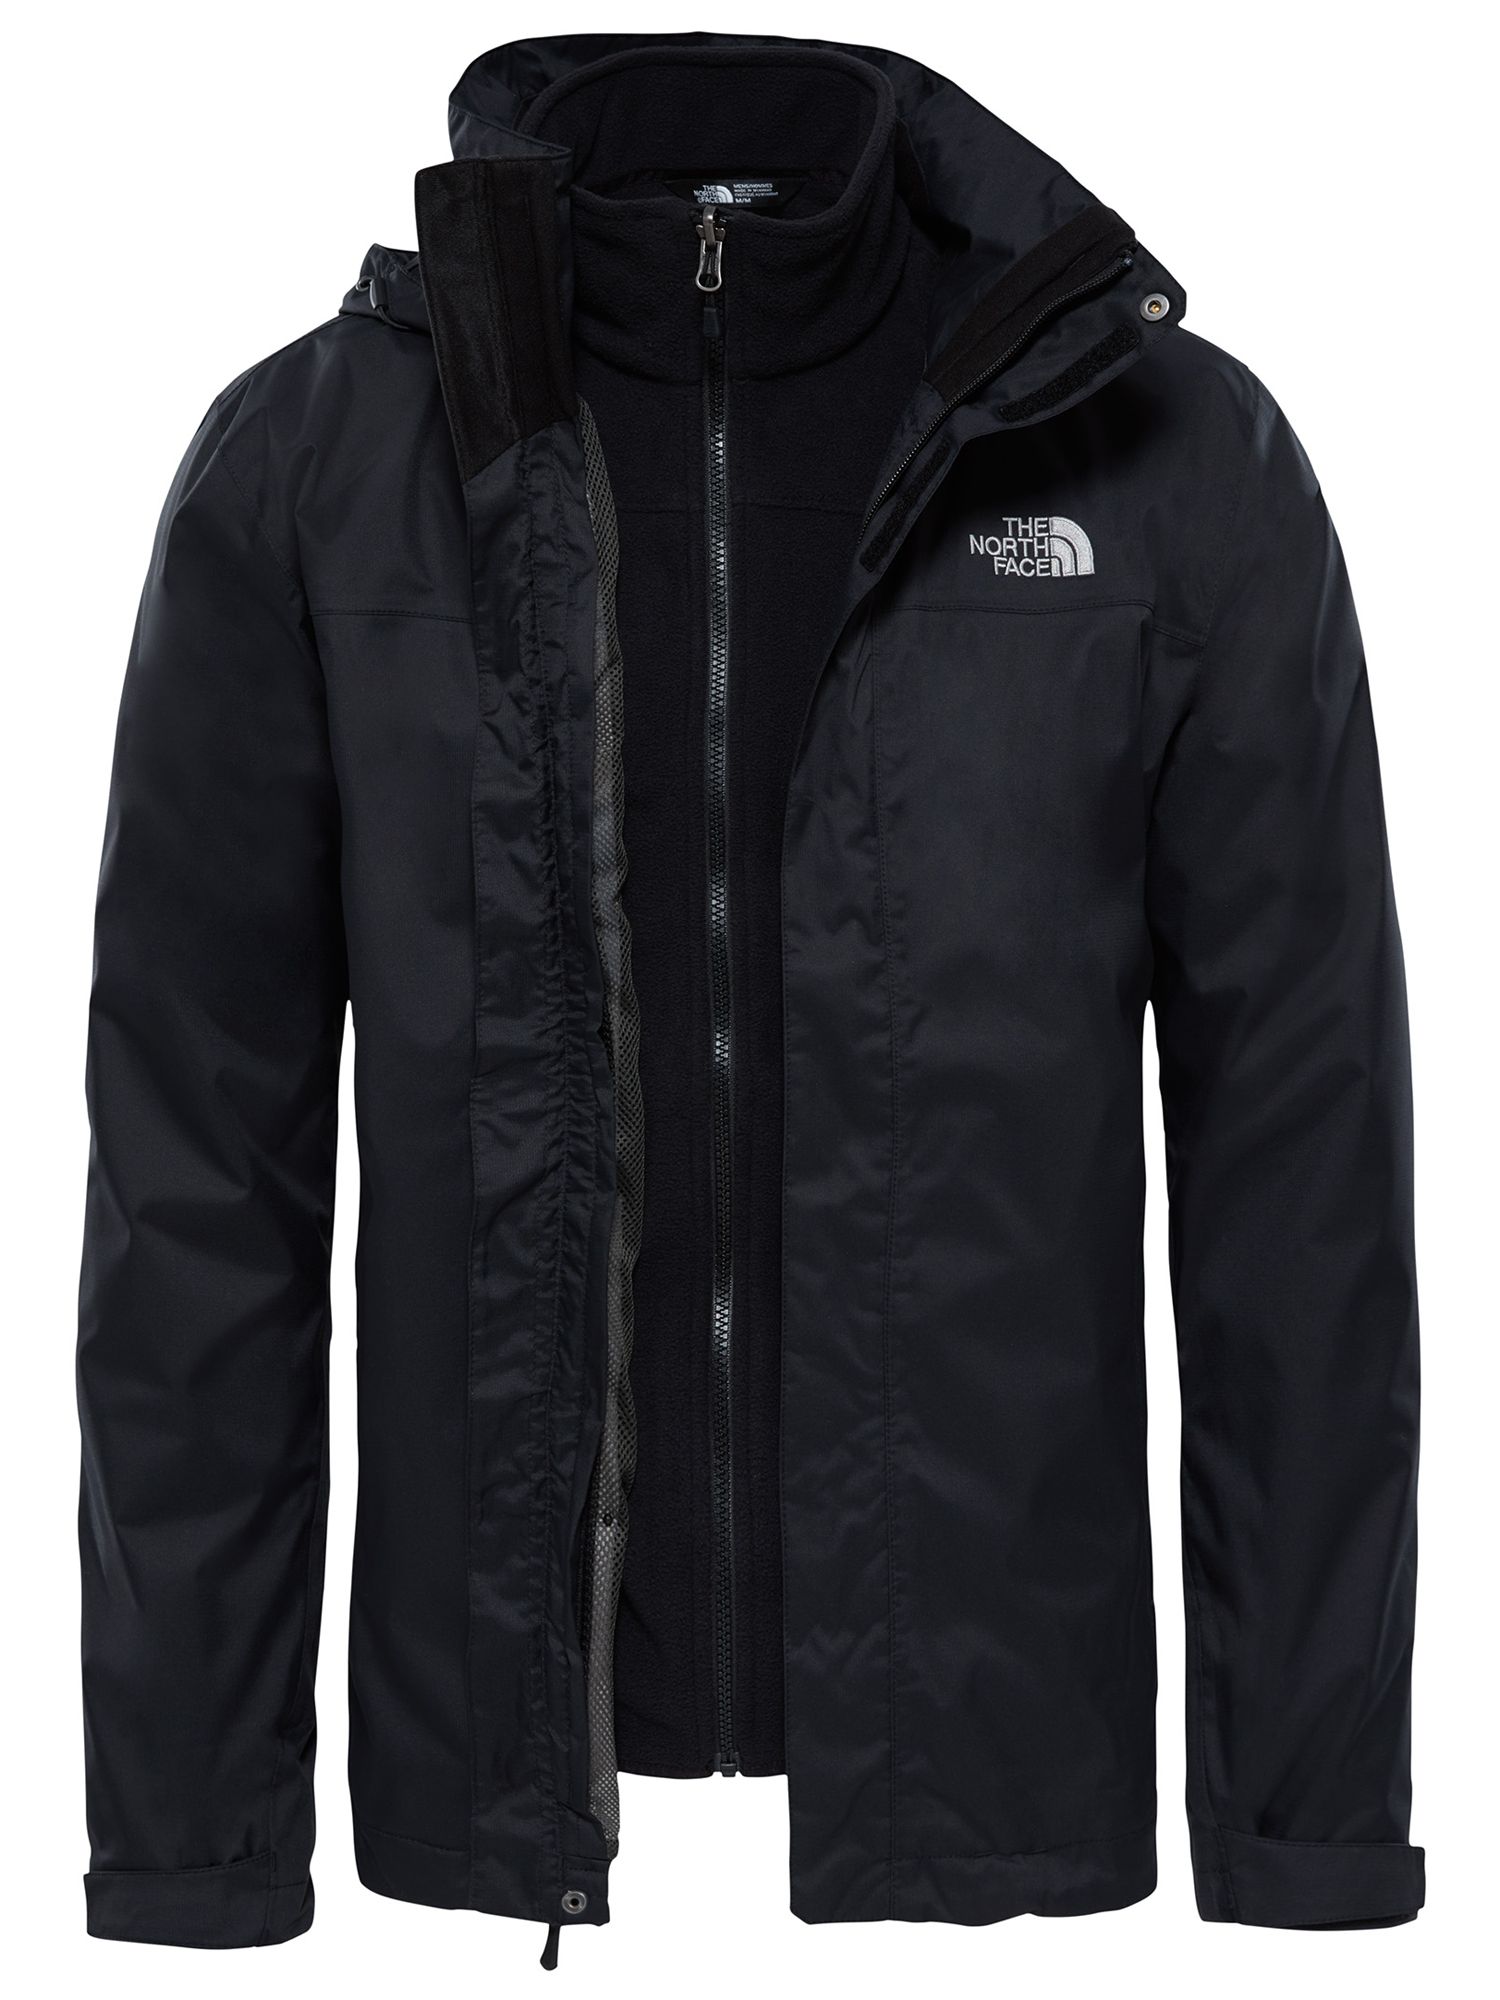 the north face men's jackets